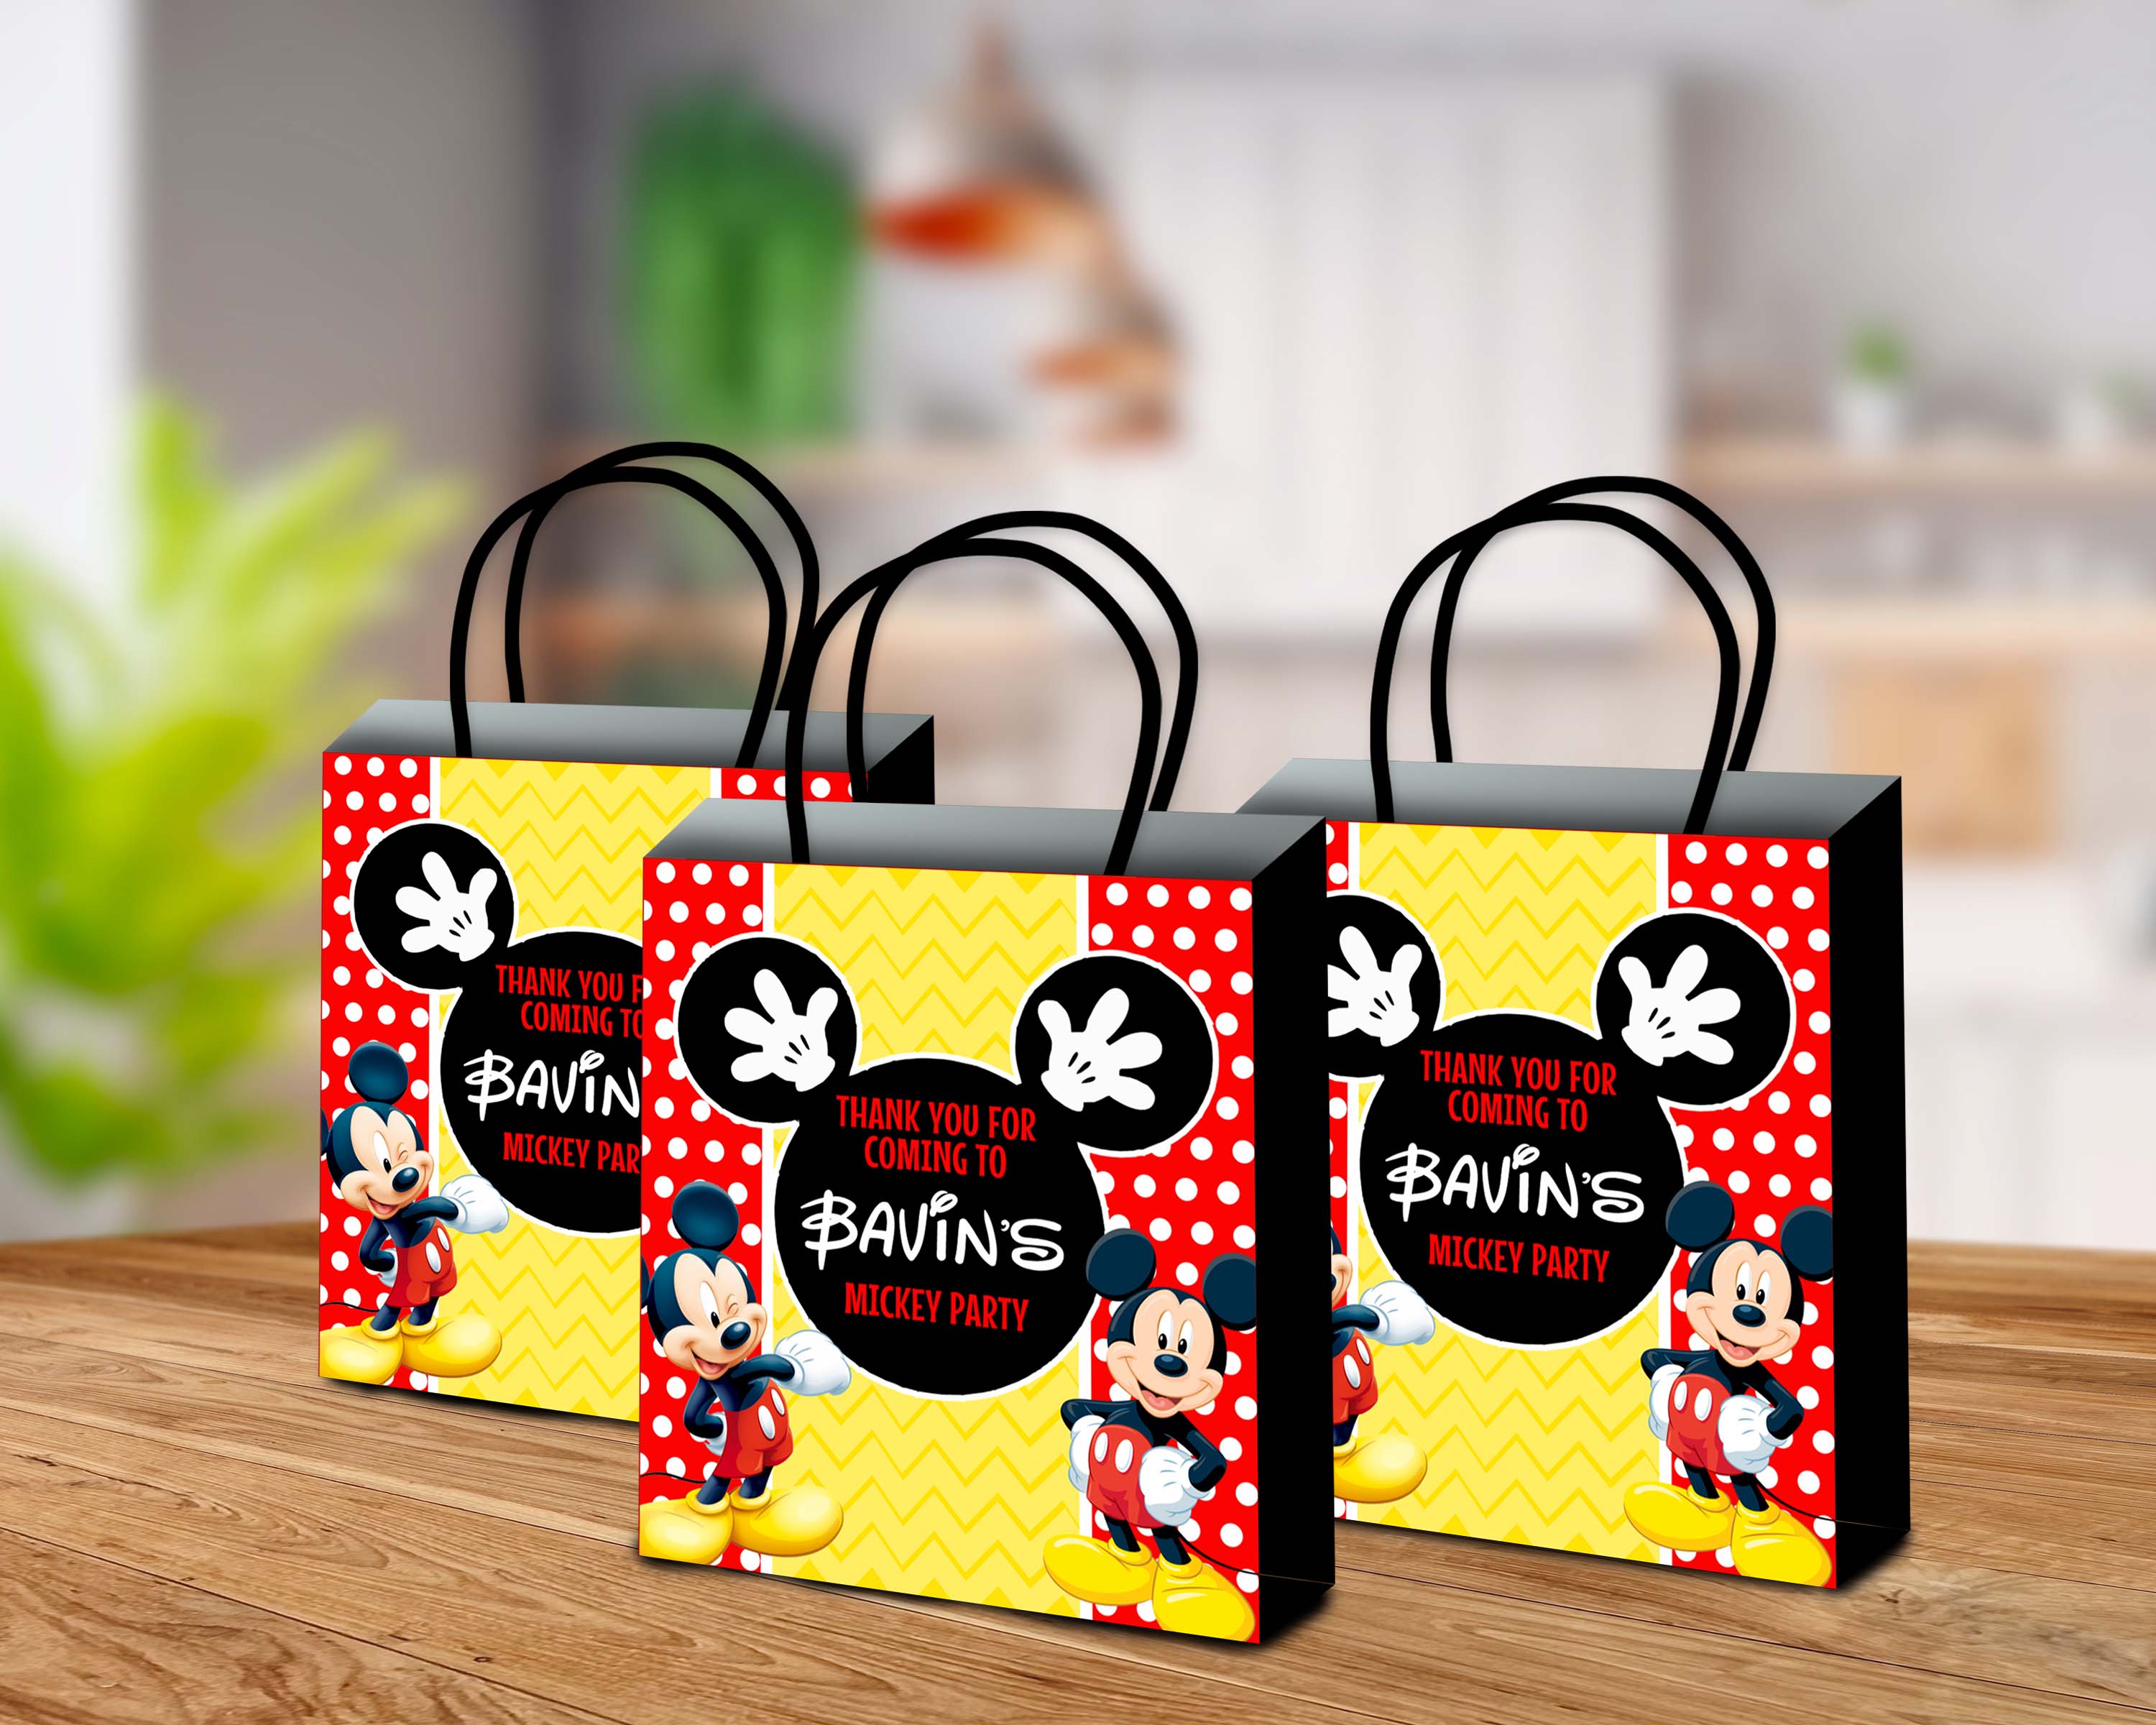 Minnie Mouse gift bag | Mickey mouse gifts, Minnie mouse gifts, Minnie mouse  birthday party